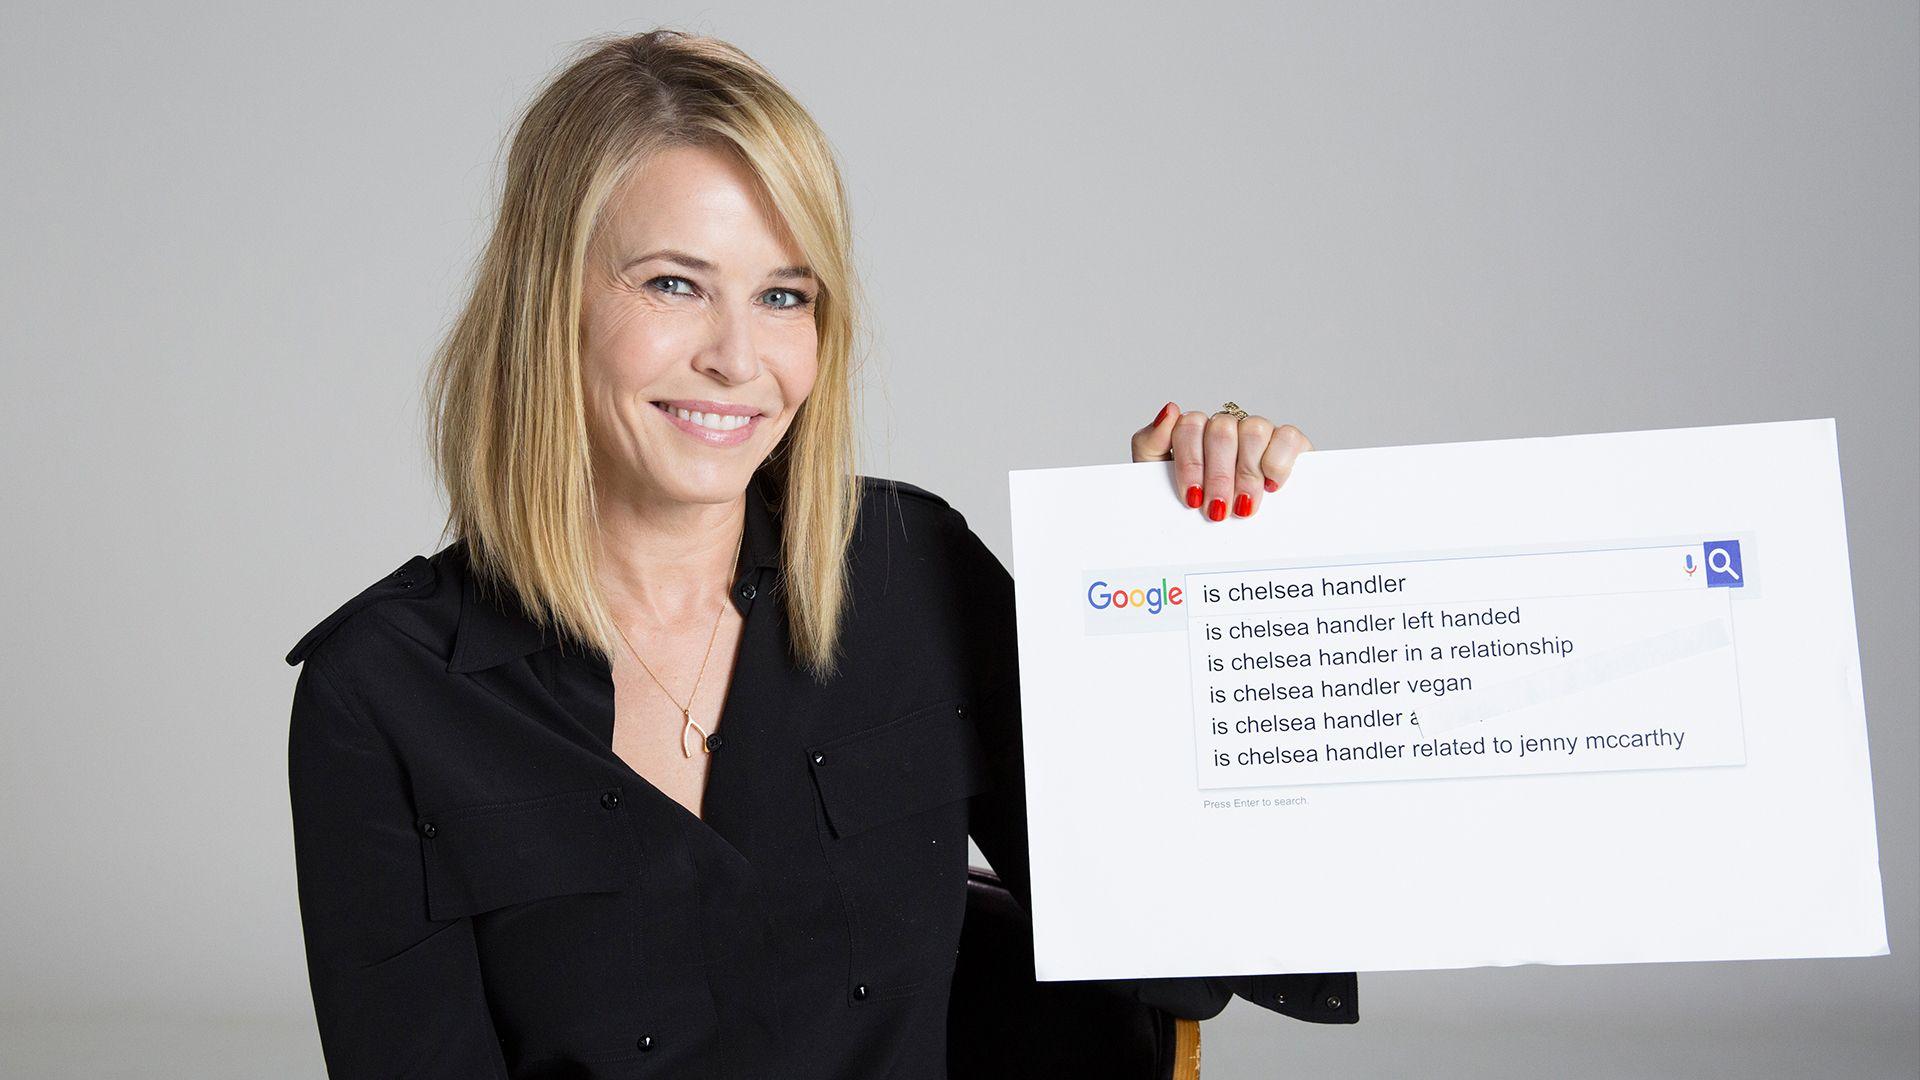 Chelsea Handler Answers the Web's Most Searched Questions